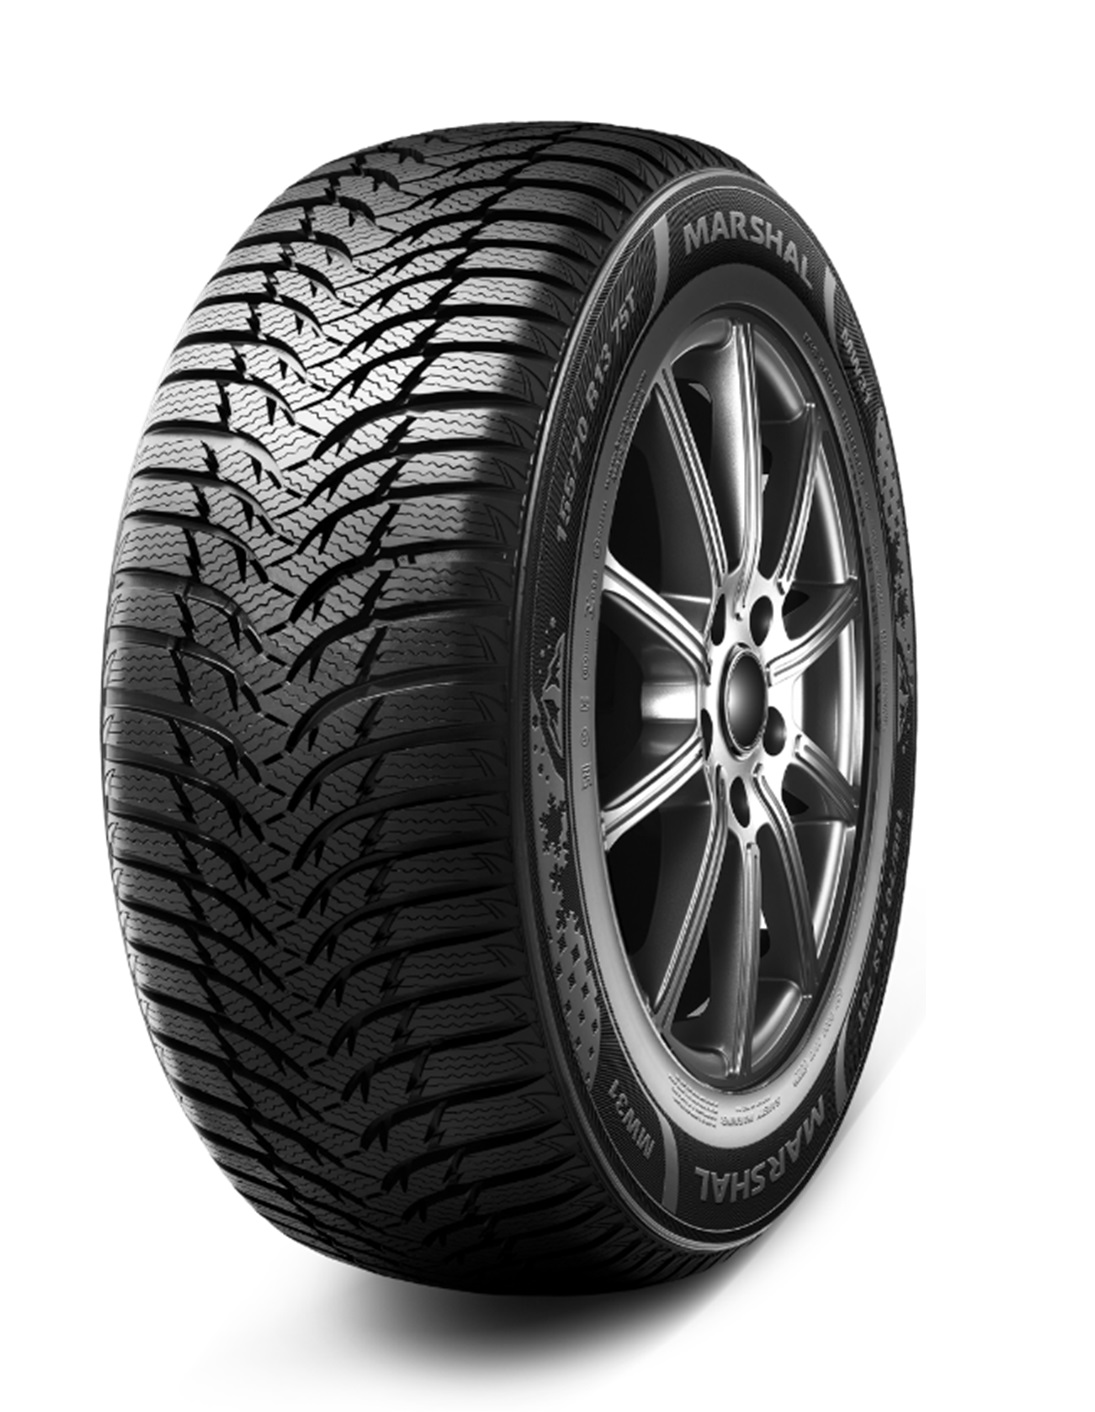 Gomme Nuove Marshal 185/65 R15 88T MW31 M+S pneumatici nuovi Invernale